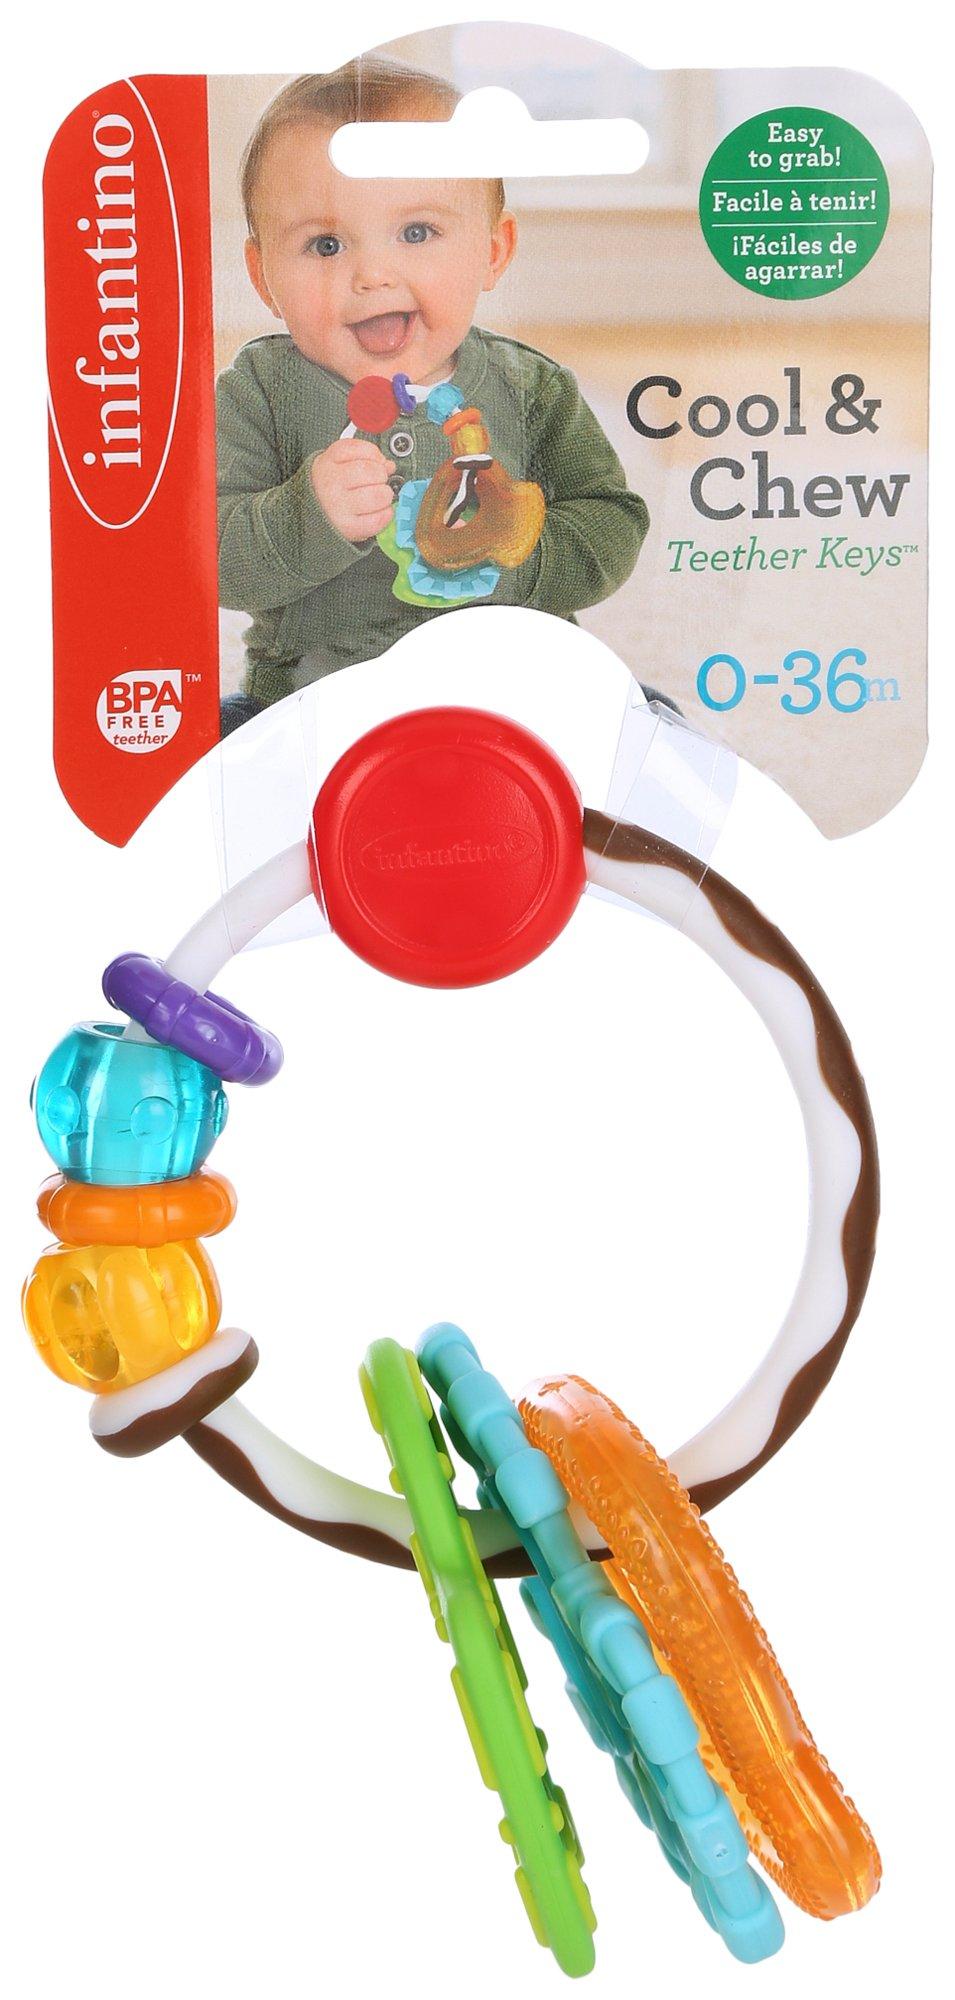 Baby Topsy Turvy Cool & Chew Teether